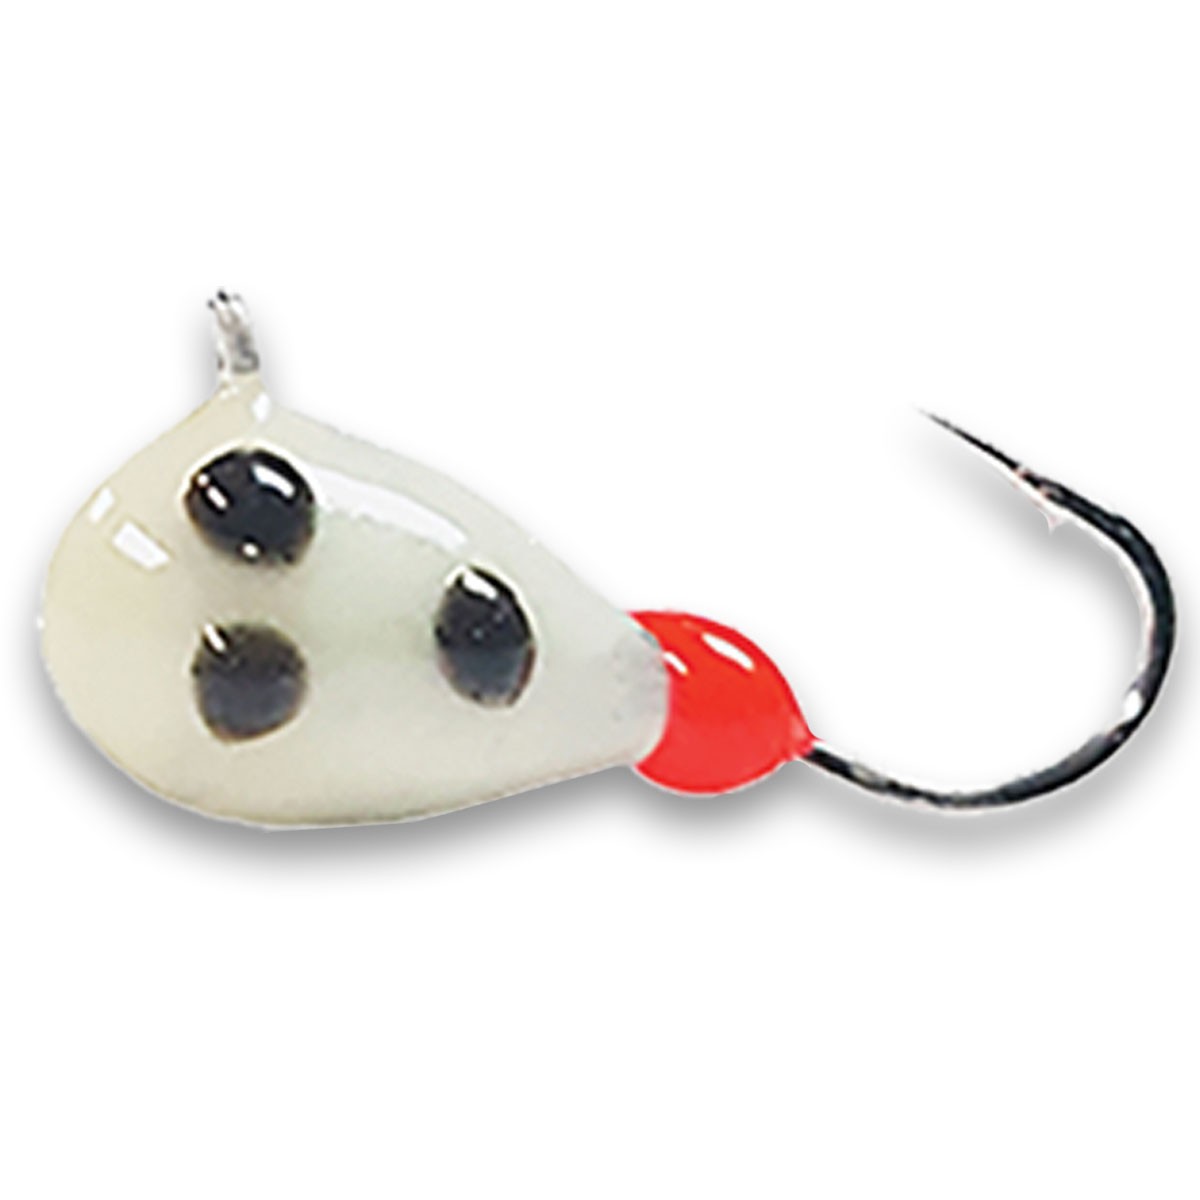 401, 4 each Tungsten Ice Fishing Tear Drop Jig, 1 Gram, #14 Hook, 4.0mm size,  White Glow SpotUV Paint & Glow PaintUnigue Wax Worm Shape Allows For More  Tungsten Weight, To Get